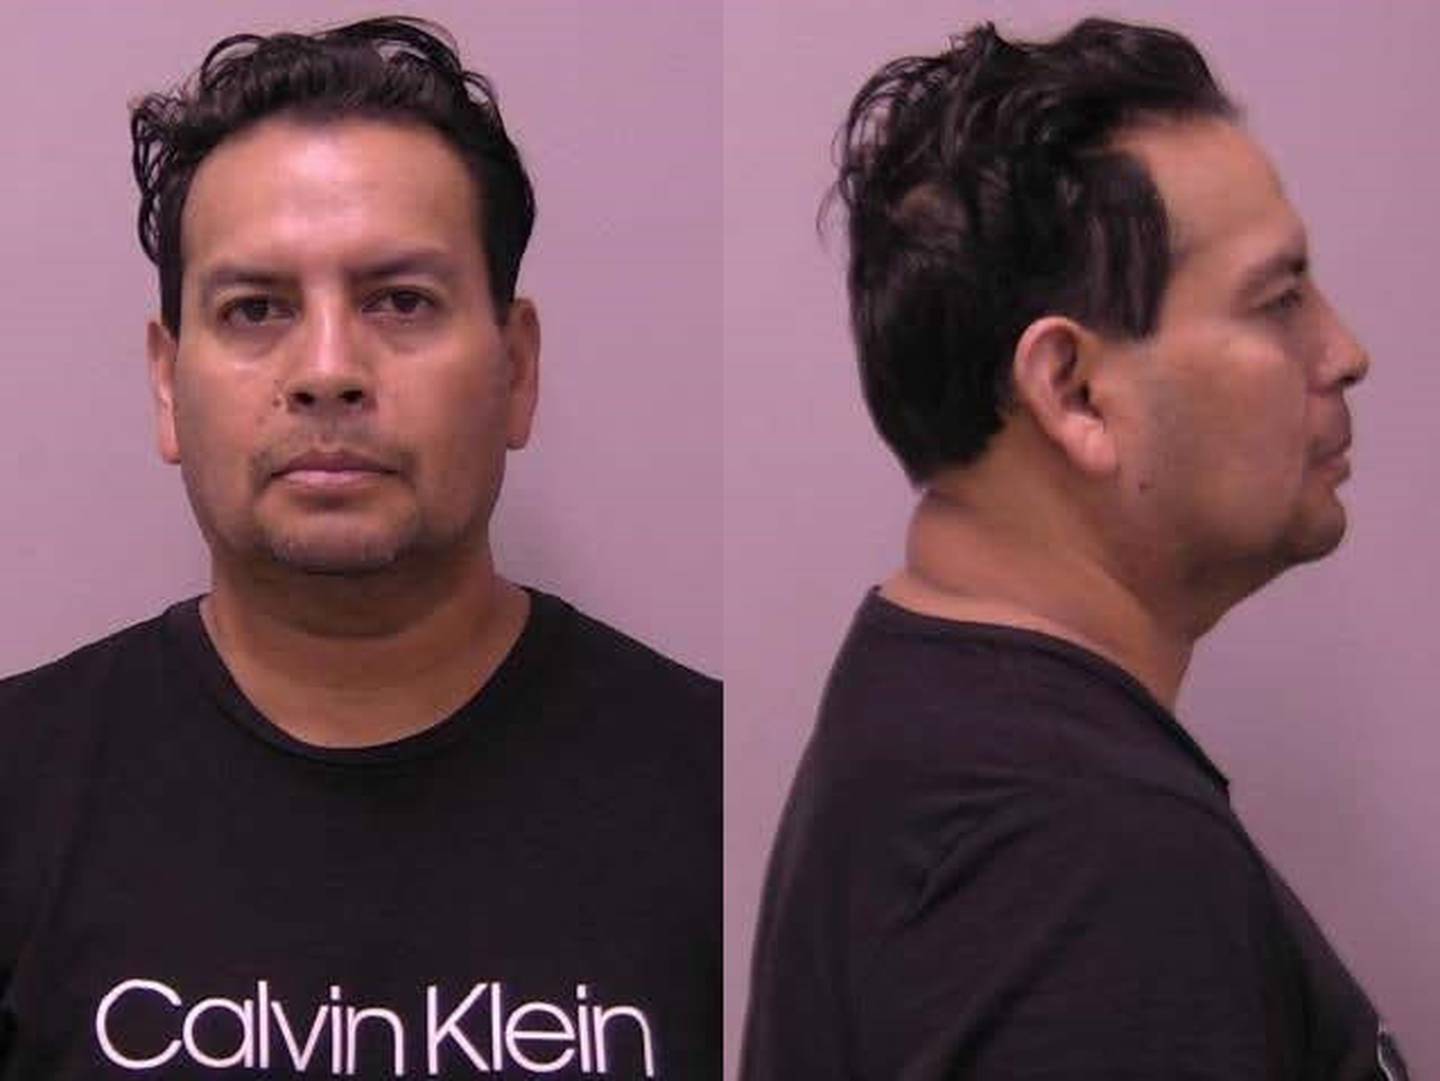 Rigoberto Parra, 46, of Aurora was charged with Involuntary Servitude (Class X Felony),Trafficking in Persons (Class 1 Felony), Involuntary Servitude (Class 1 Felony), Involuntary Servitude (Class 4 Felony) and Promoting Prostitution.